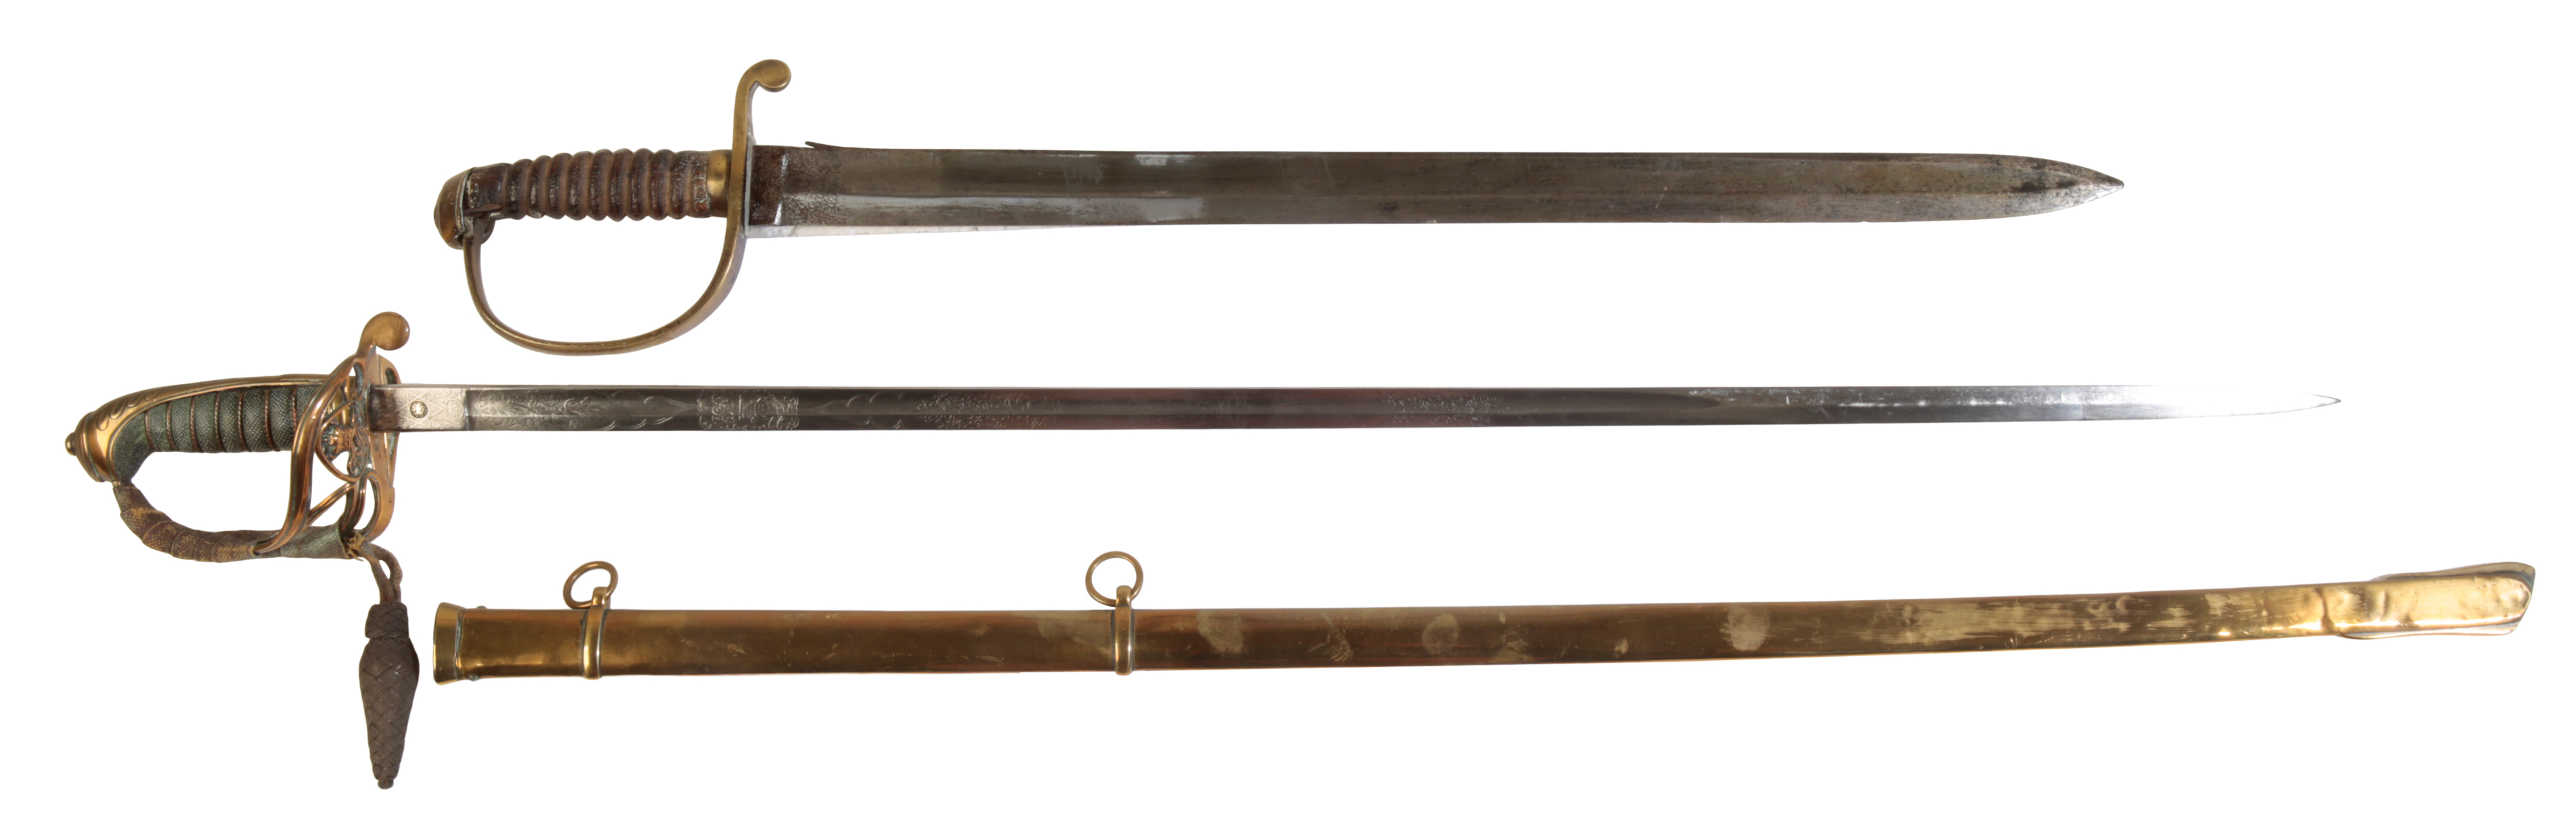 AN OFFICERS DRESS SWORD BY PULFORD